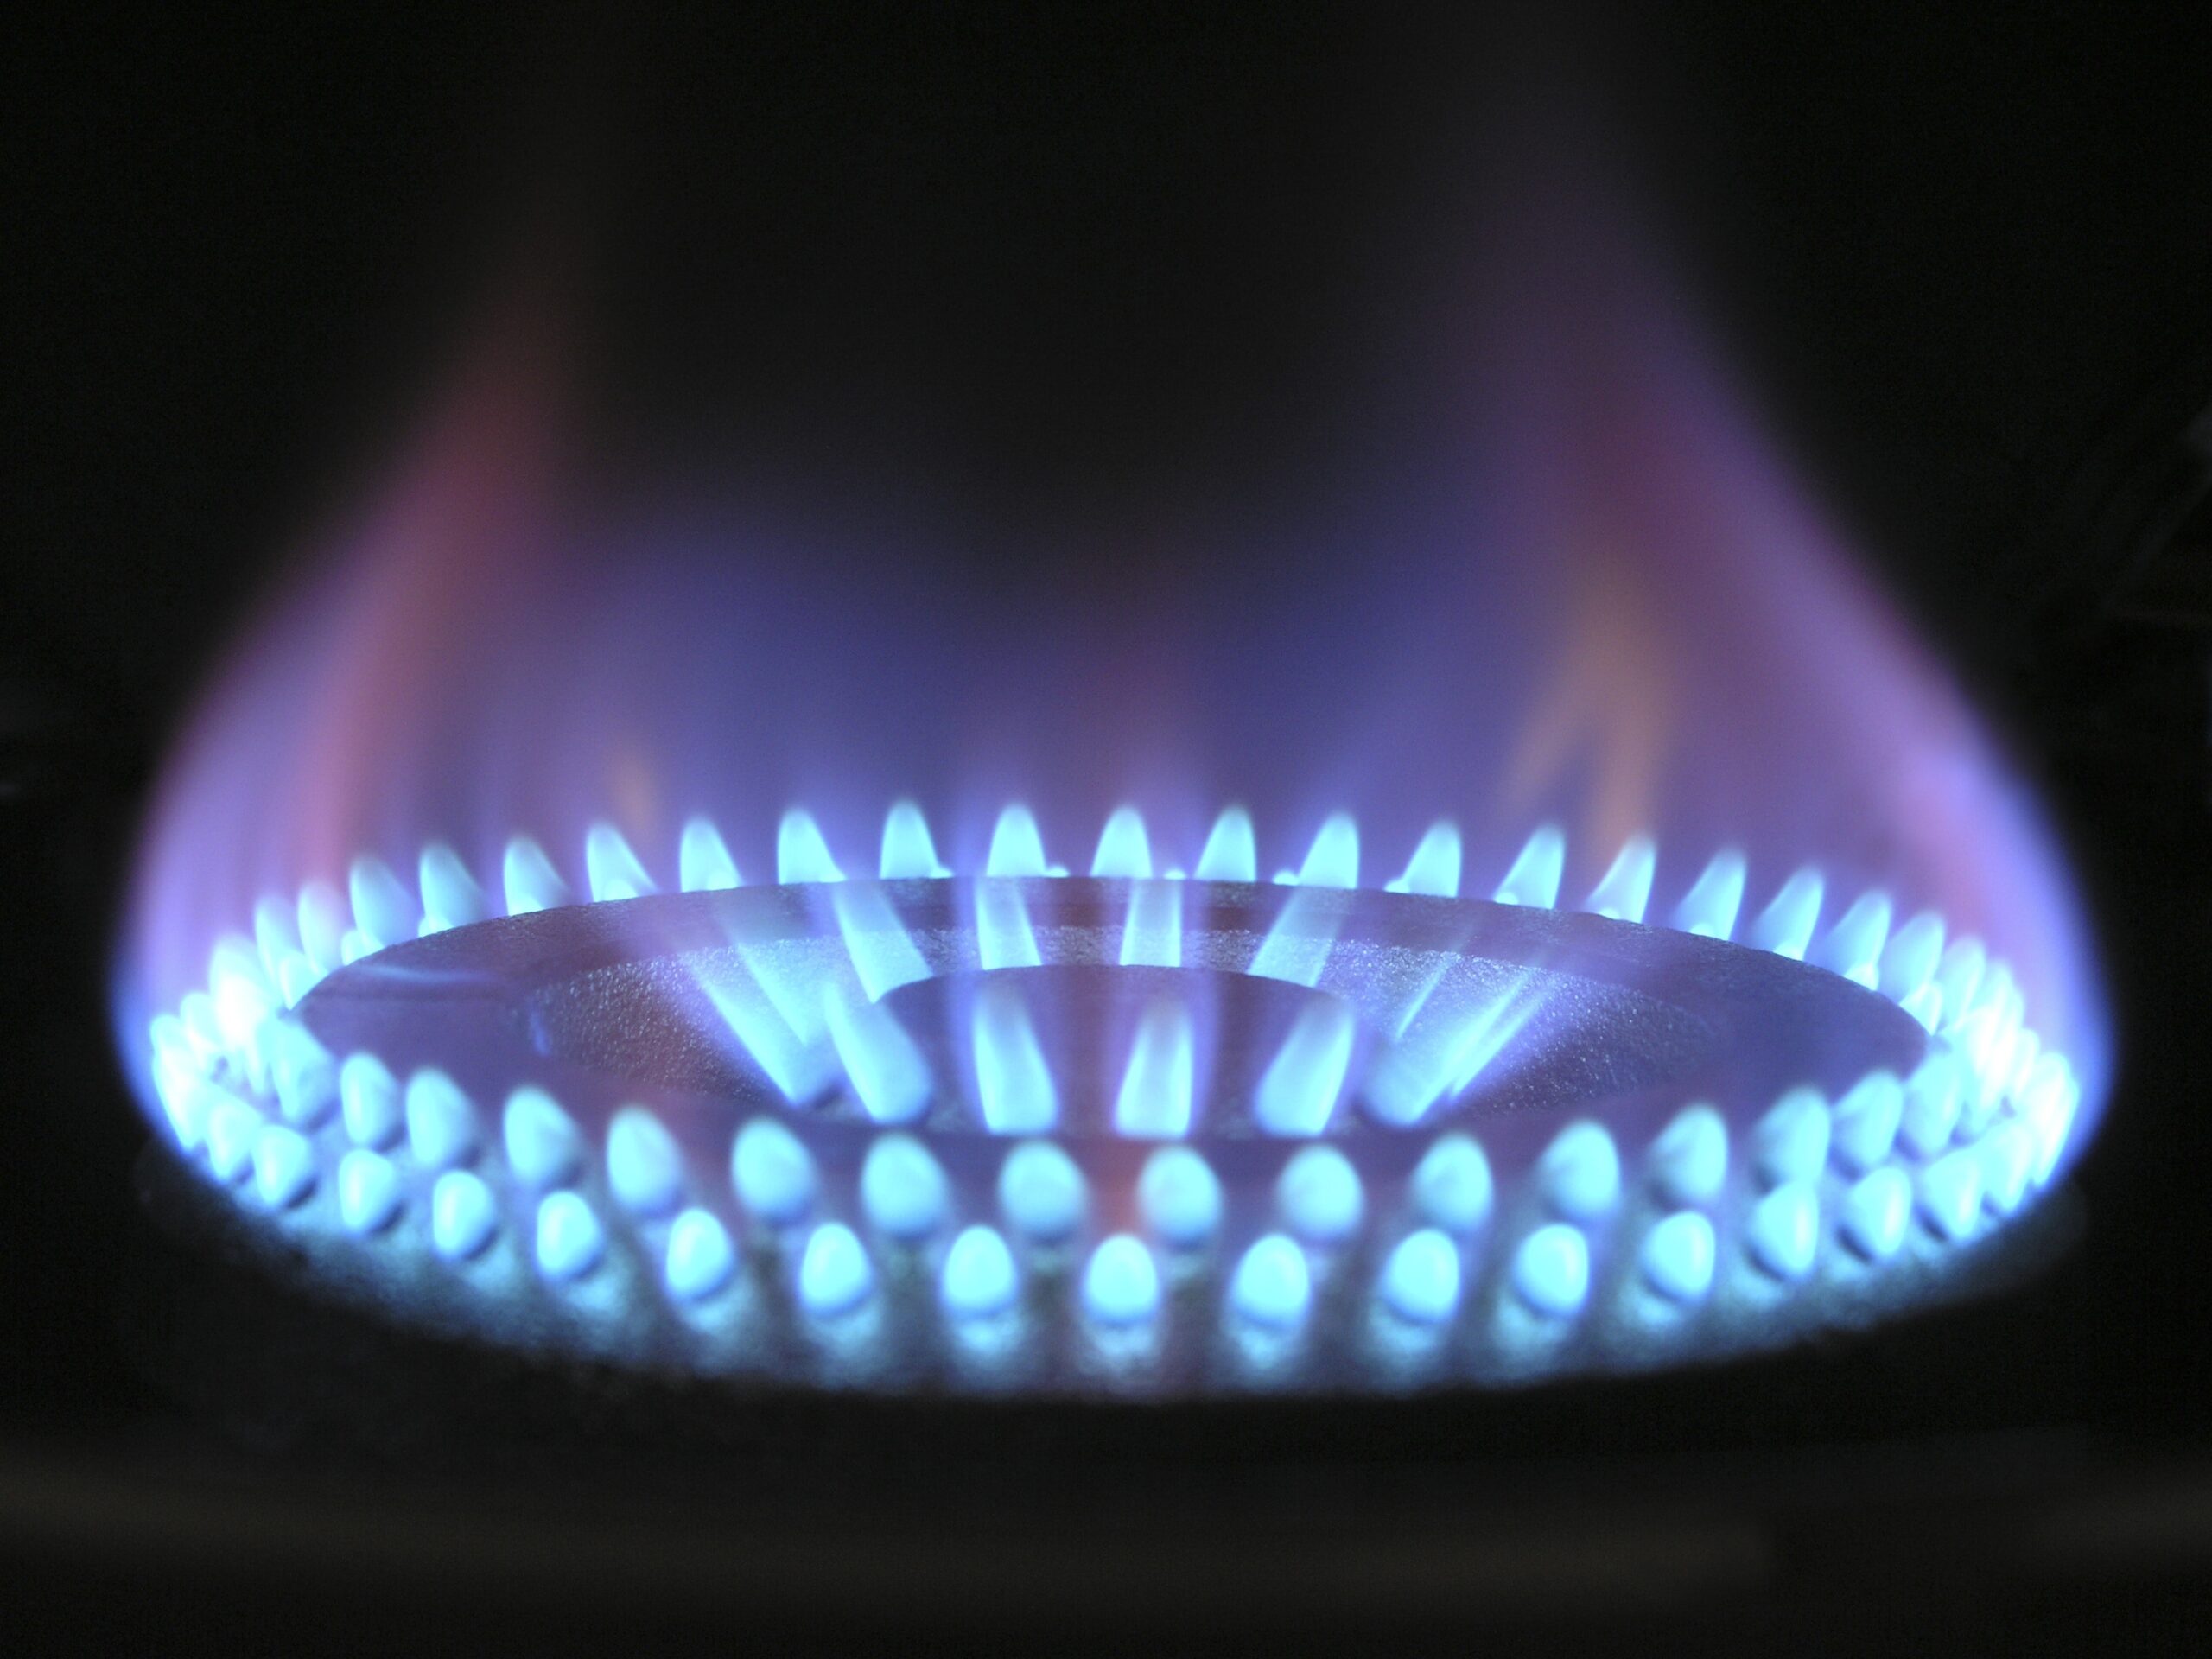 European Prices on Natural Gas are dropping